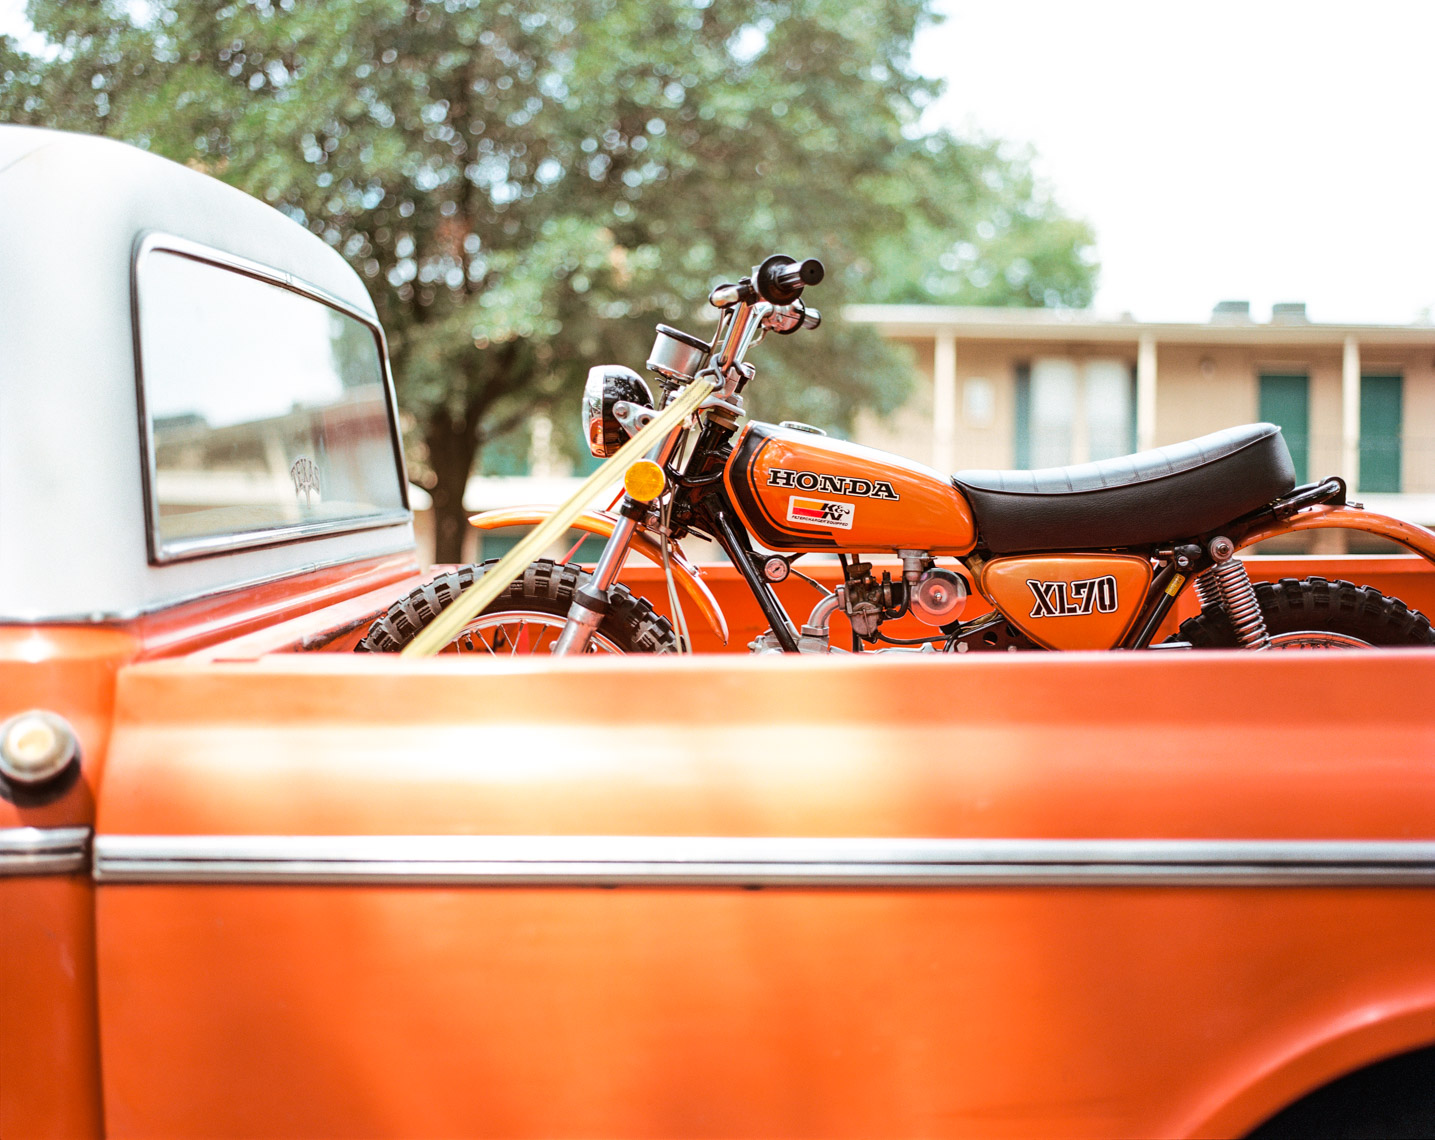 Vintage truck carrying dirtbike | Editorial Lifestyle Photographer